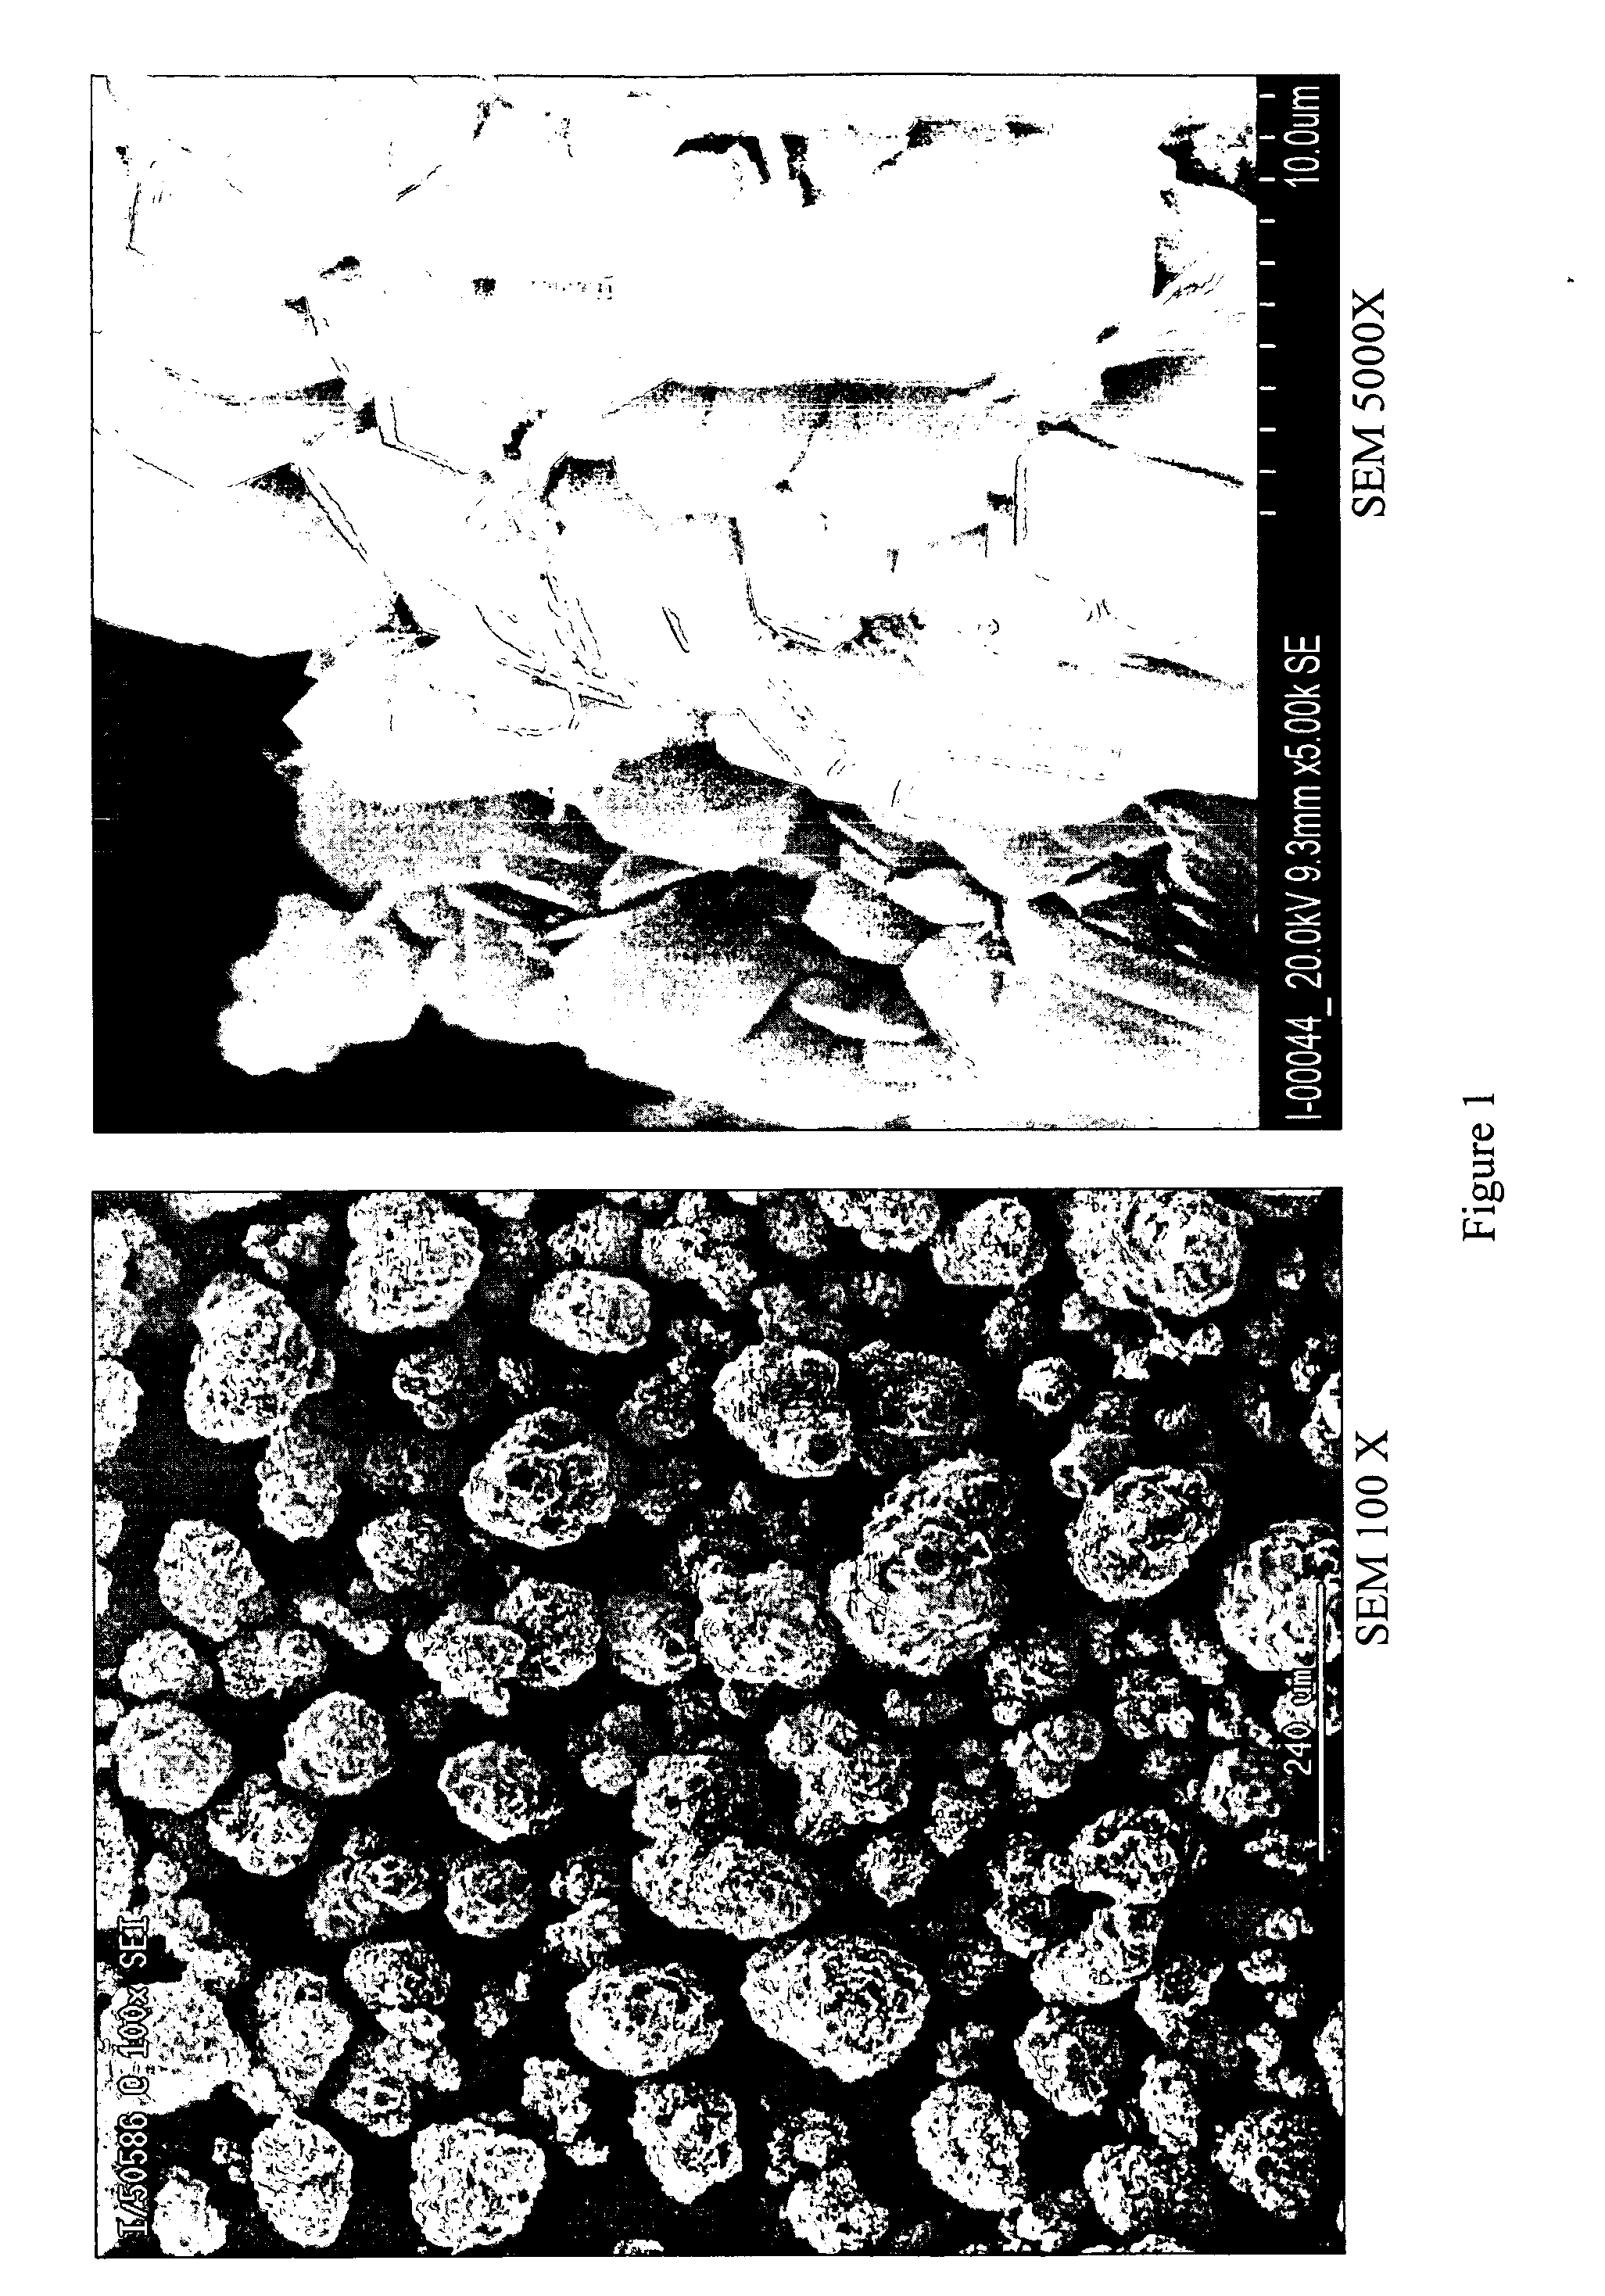 Composition and method for improved aluminum hydroxide production.